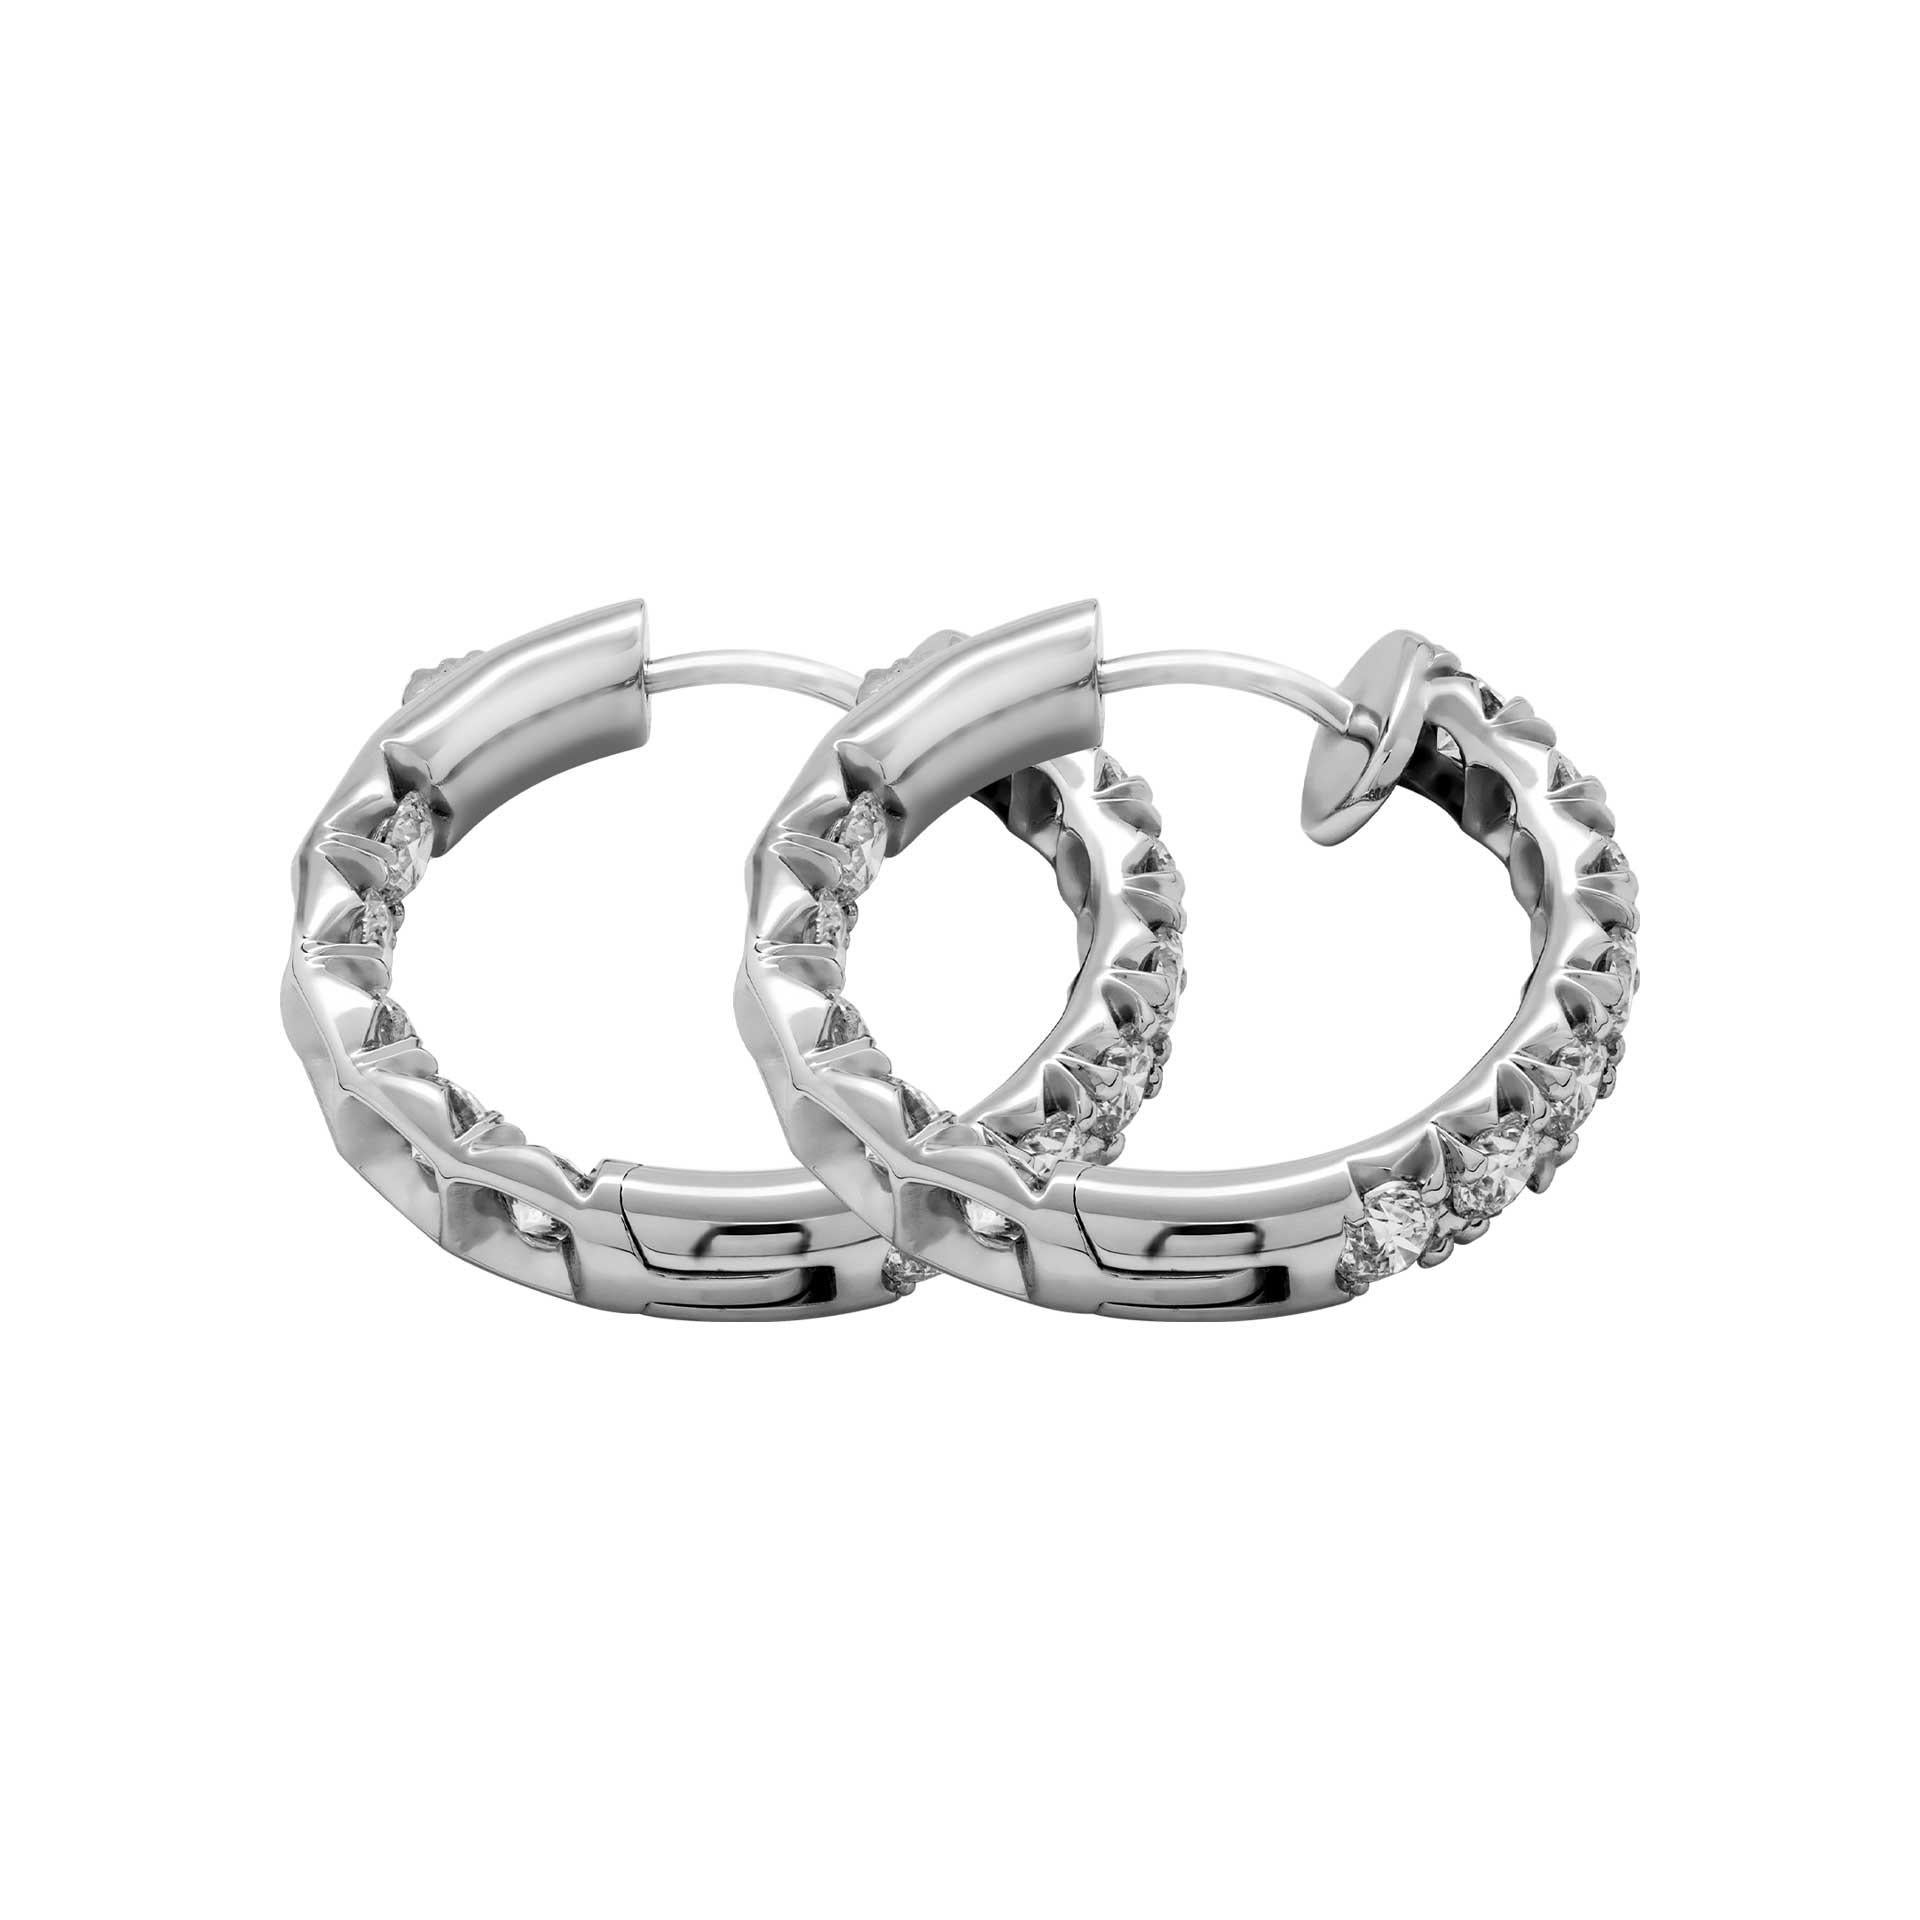 Diamond Hoop Earrings 
Mounted in 14K White Gold with 4.7ct of White Full Brilliant Cut Round diamonds 
Totaling 24 stones and custom made lock , super secure and discrete. 

Diameter: 25mm
Width: 4.7mm
Weight: 8.12gr 